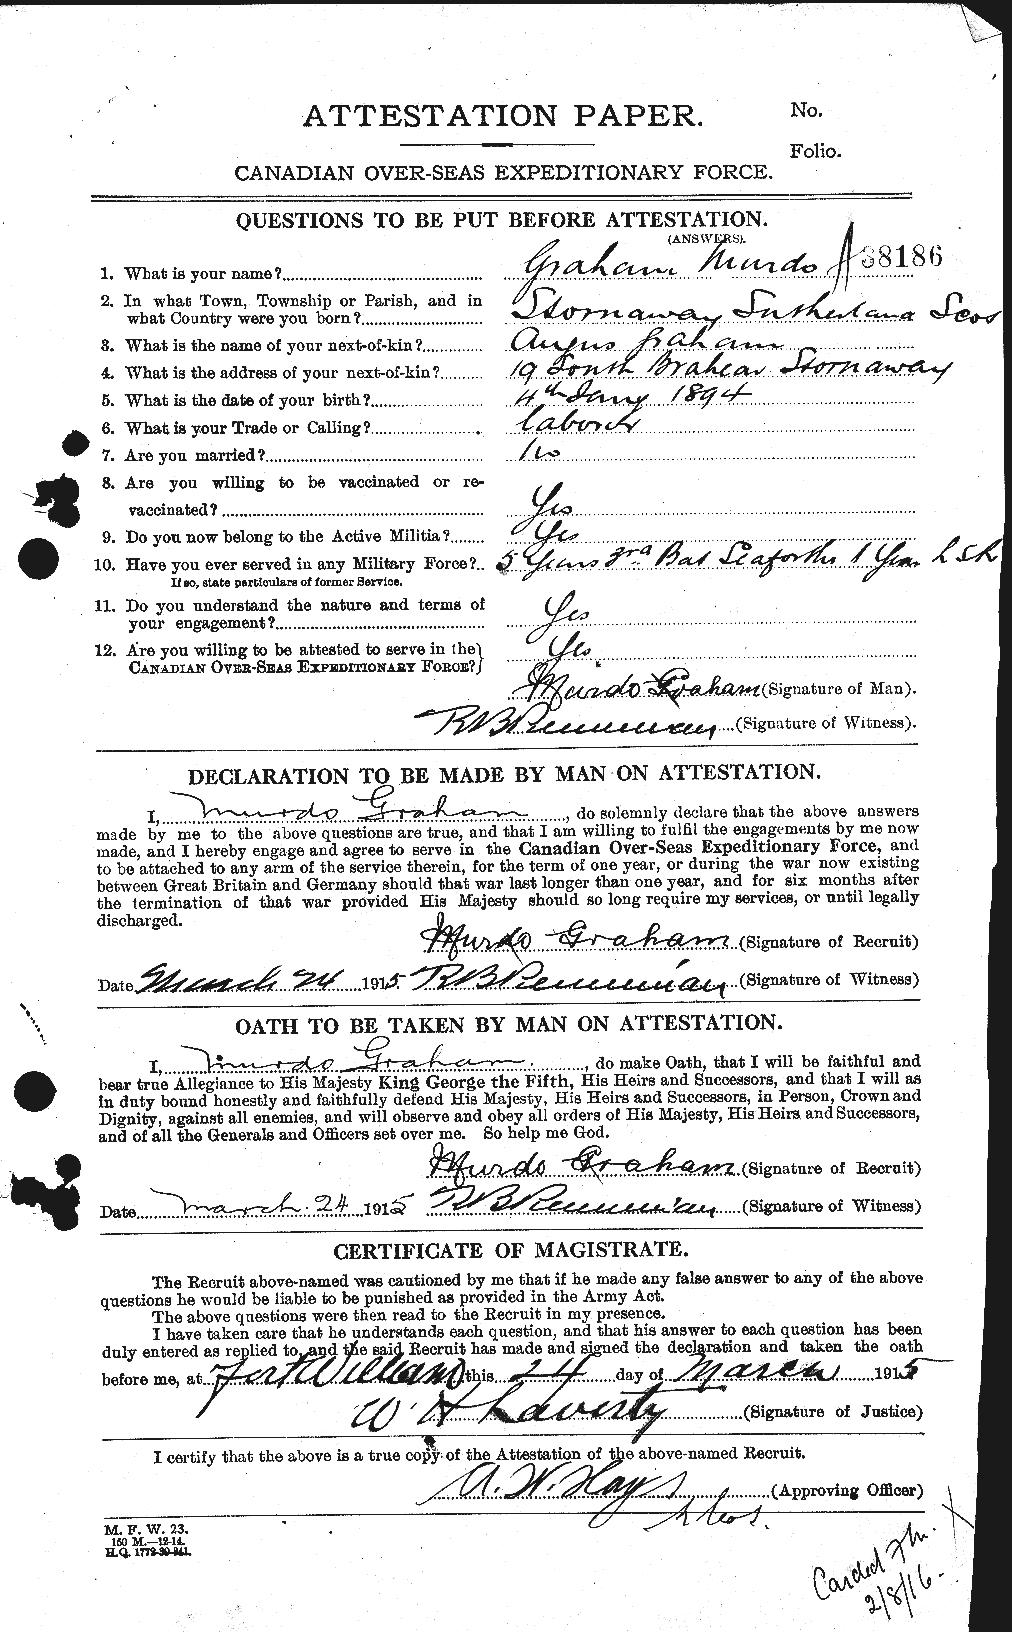 Personnel Records of the First World War - CEF 359313a